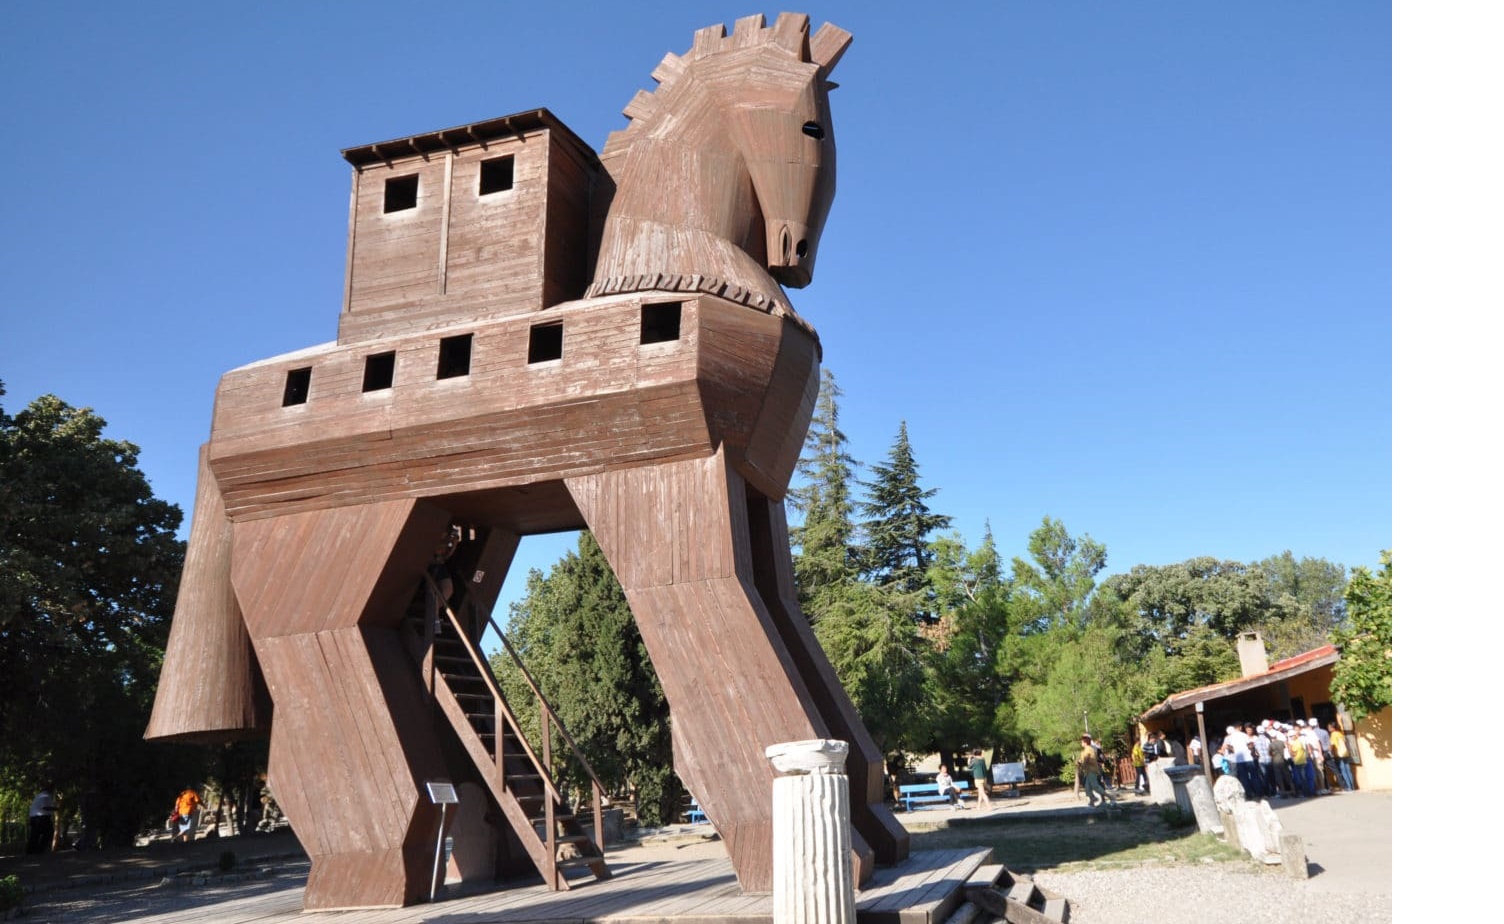 what was the trojan horse in greek mythology and how did odysseus use the trojan horse to defeat troy